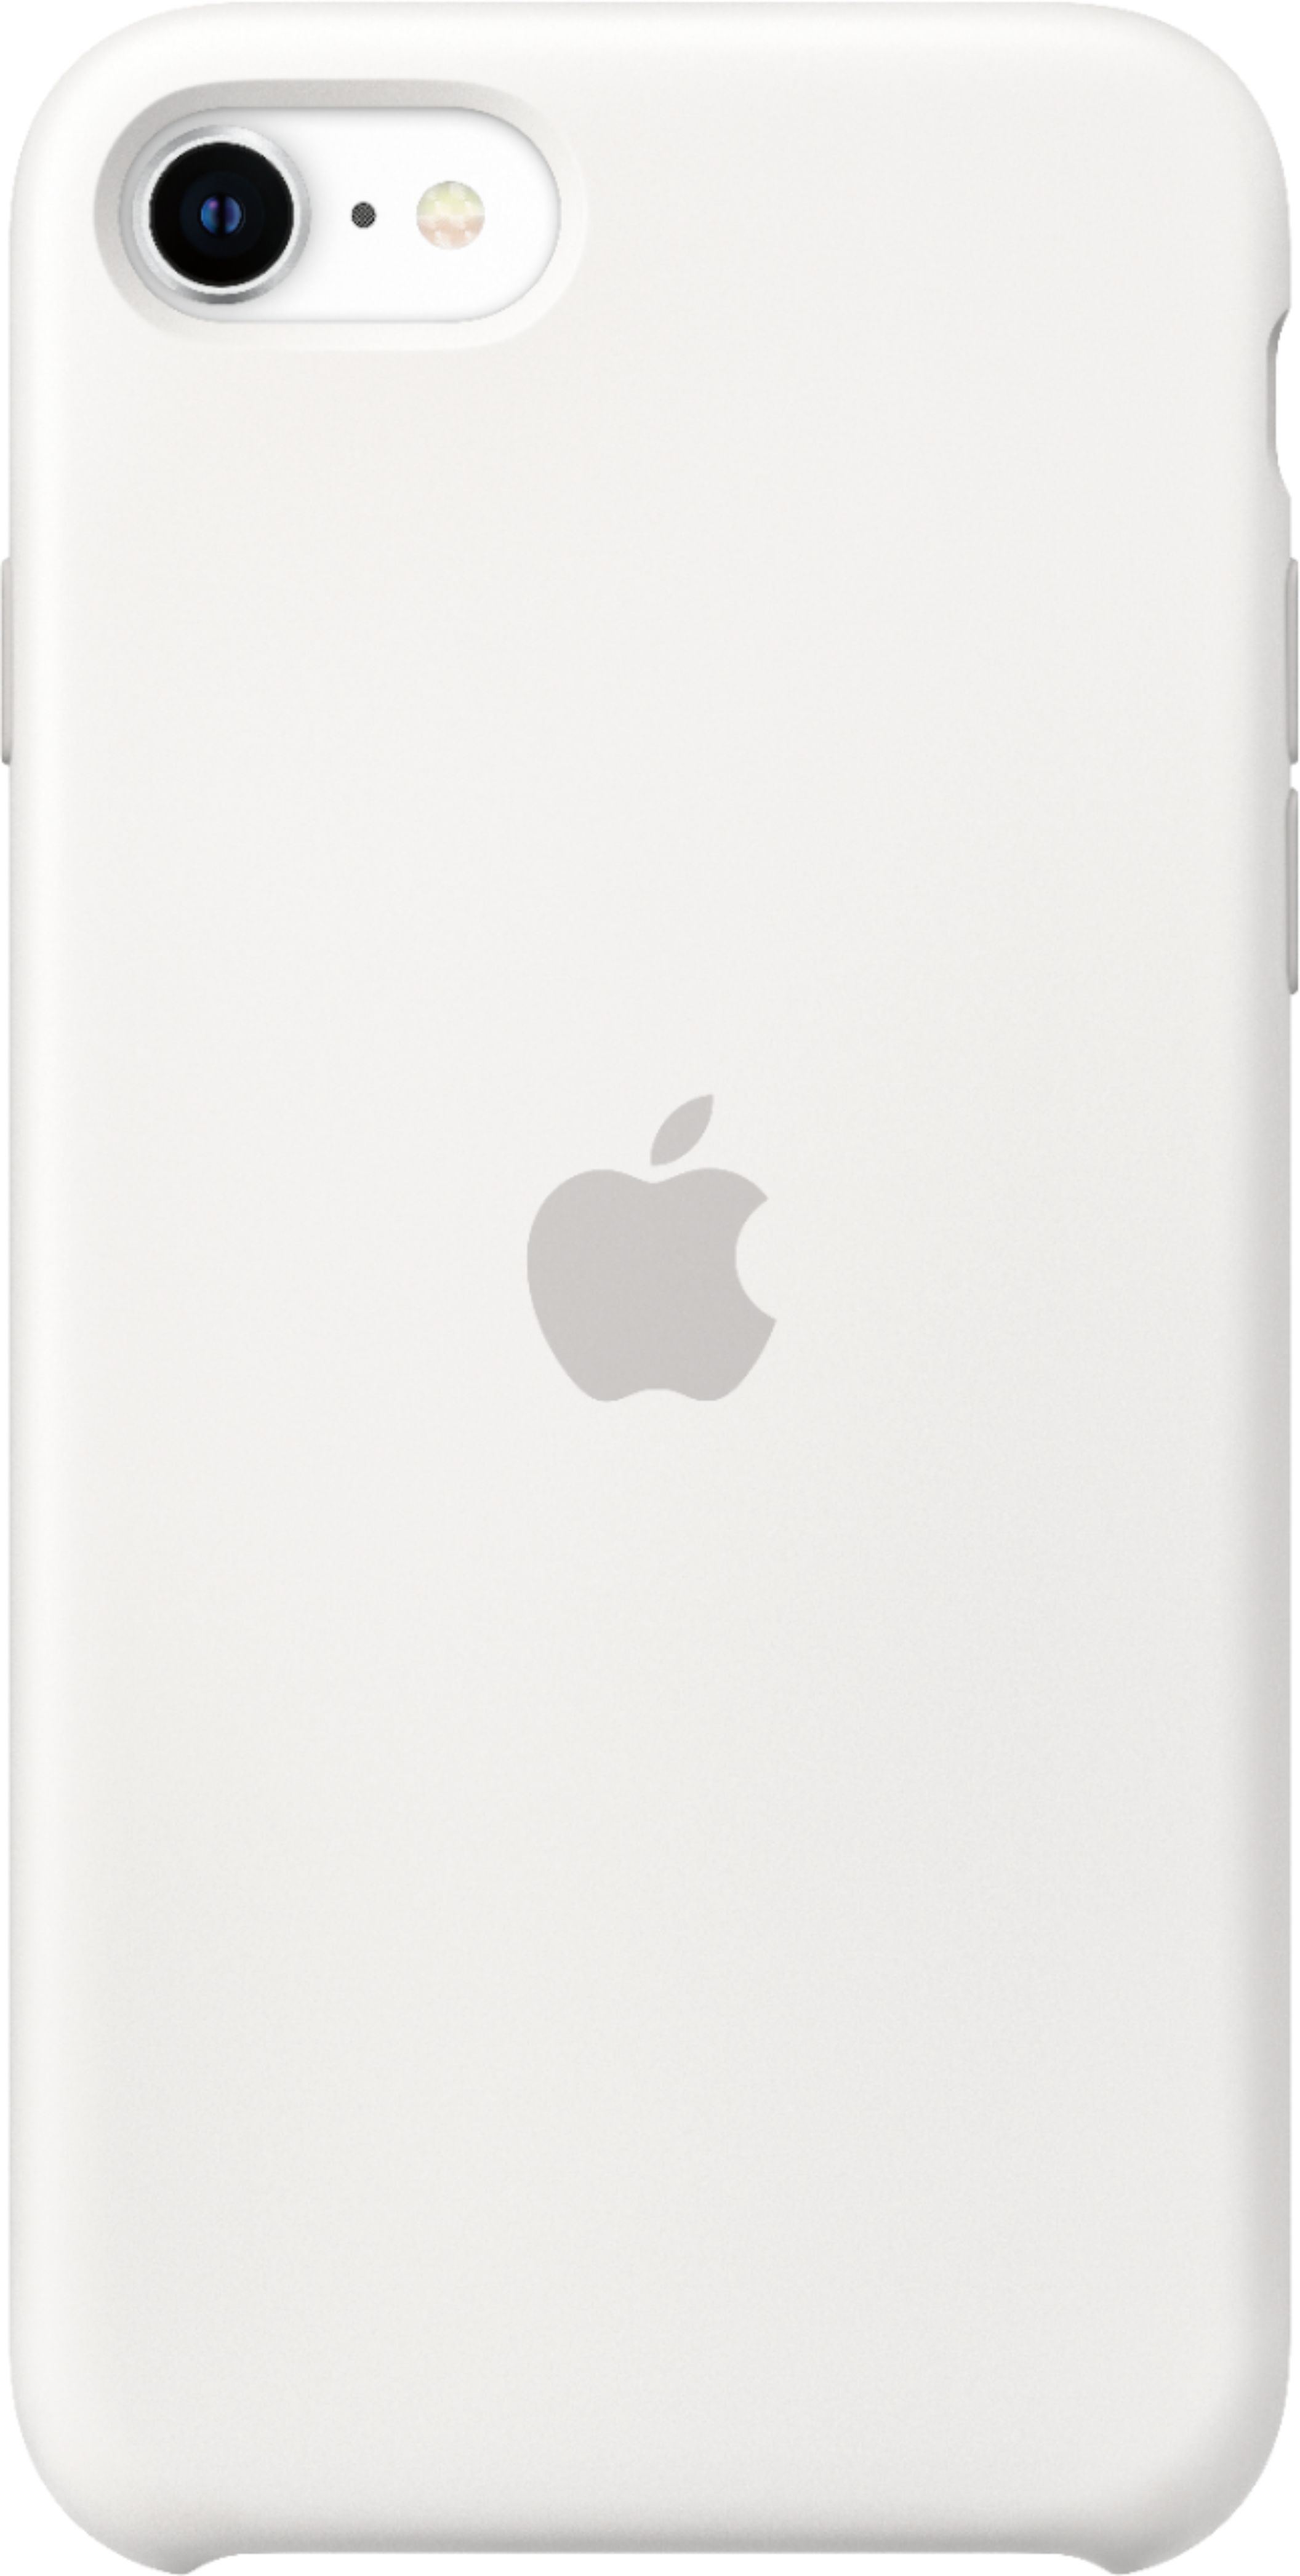 Apple Silicon iPhone SE 2020 Case White - $14 Best Buy